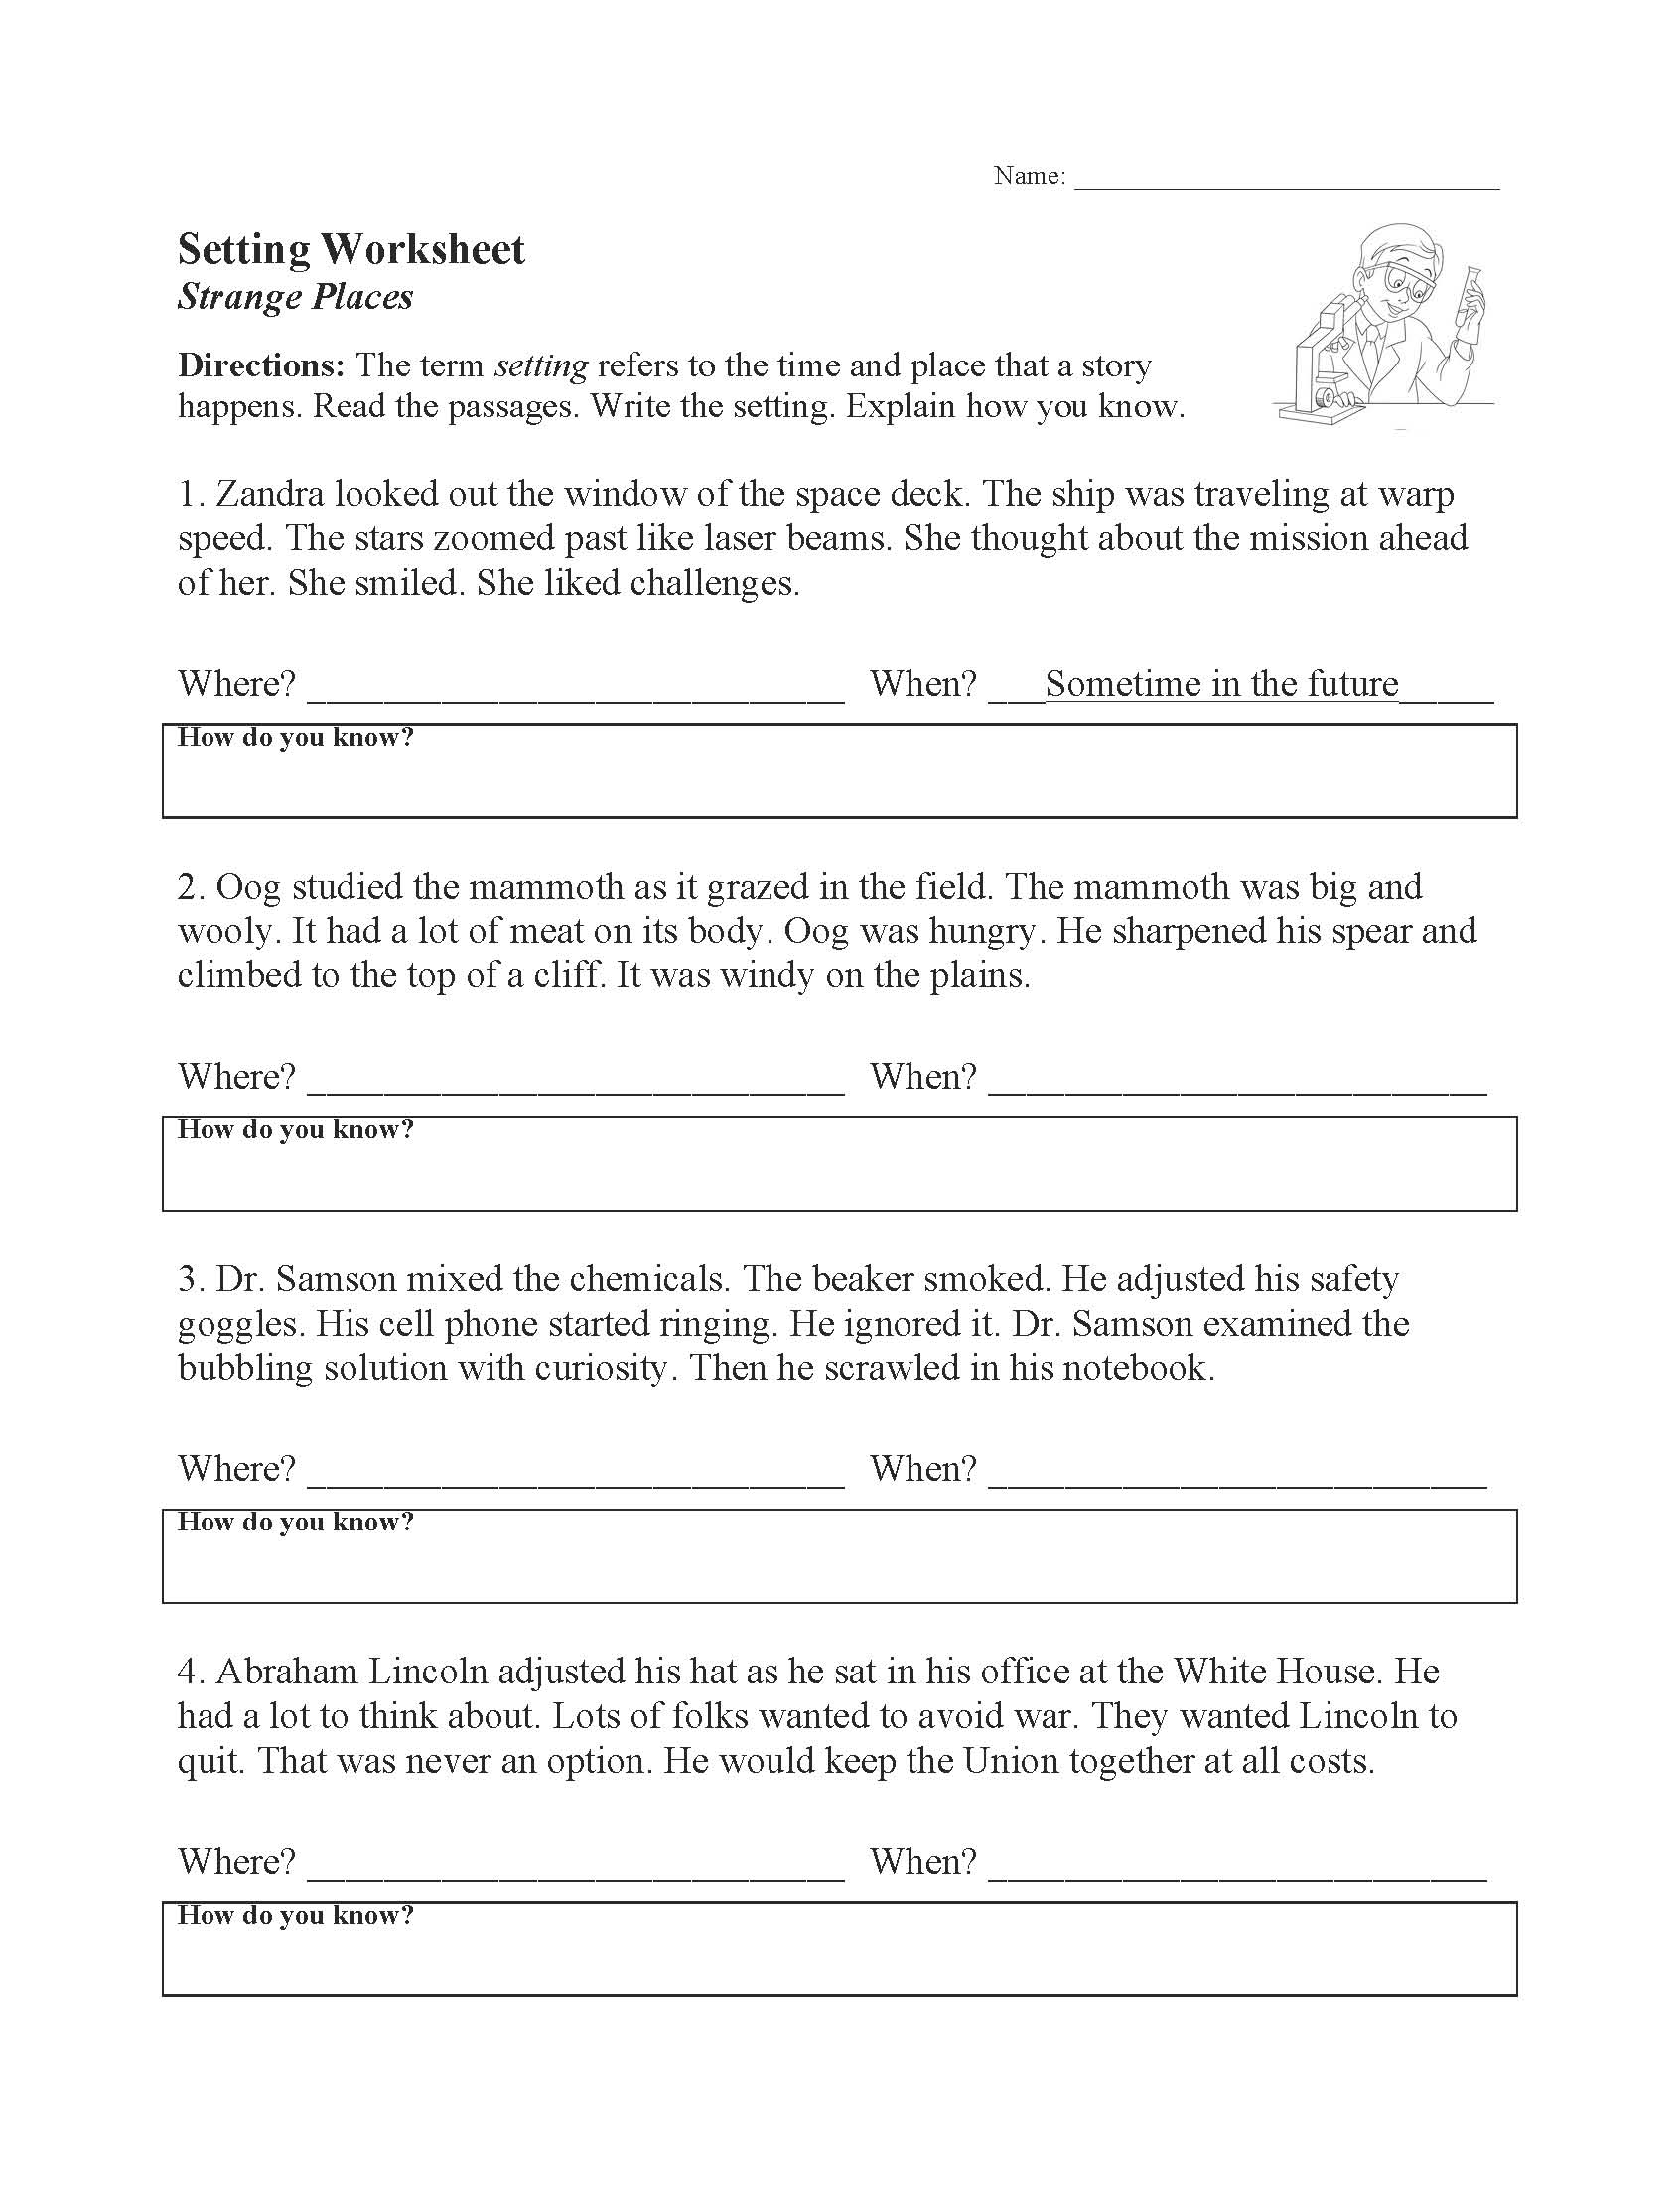 This is a preview image of our Setting Worksheet. Click on it to enlarge this image and view the source file.